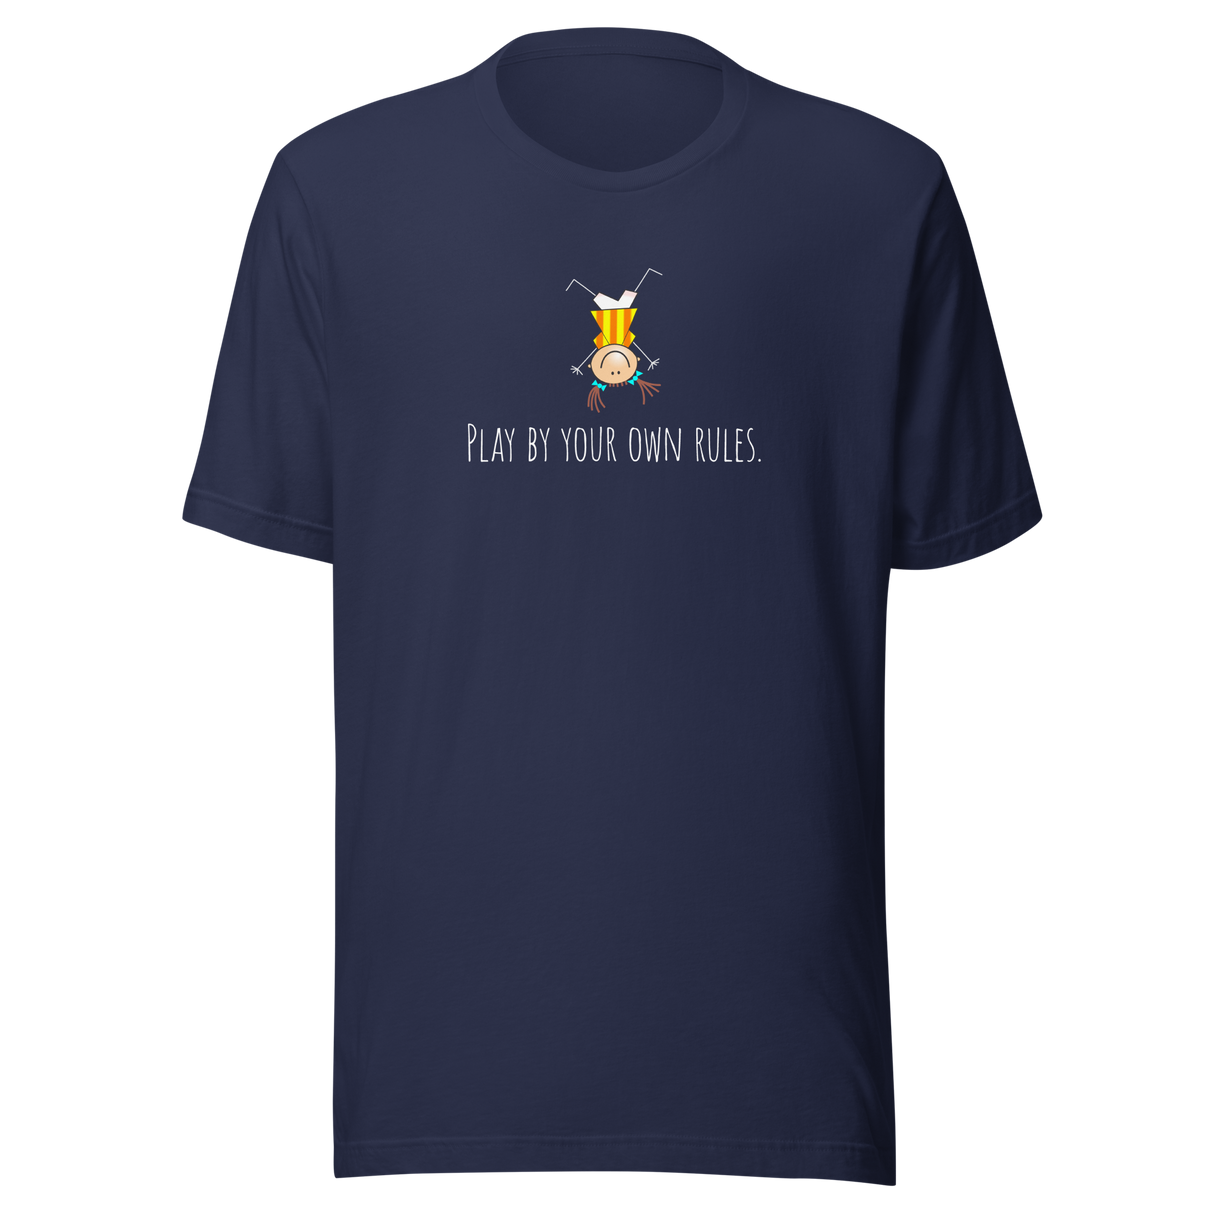 play-by-your-own-rules-achieve-tee-dreams-t-shirt-attitude-tee-inspirational-t-shirt-motivational-tee#color_navy